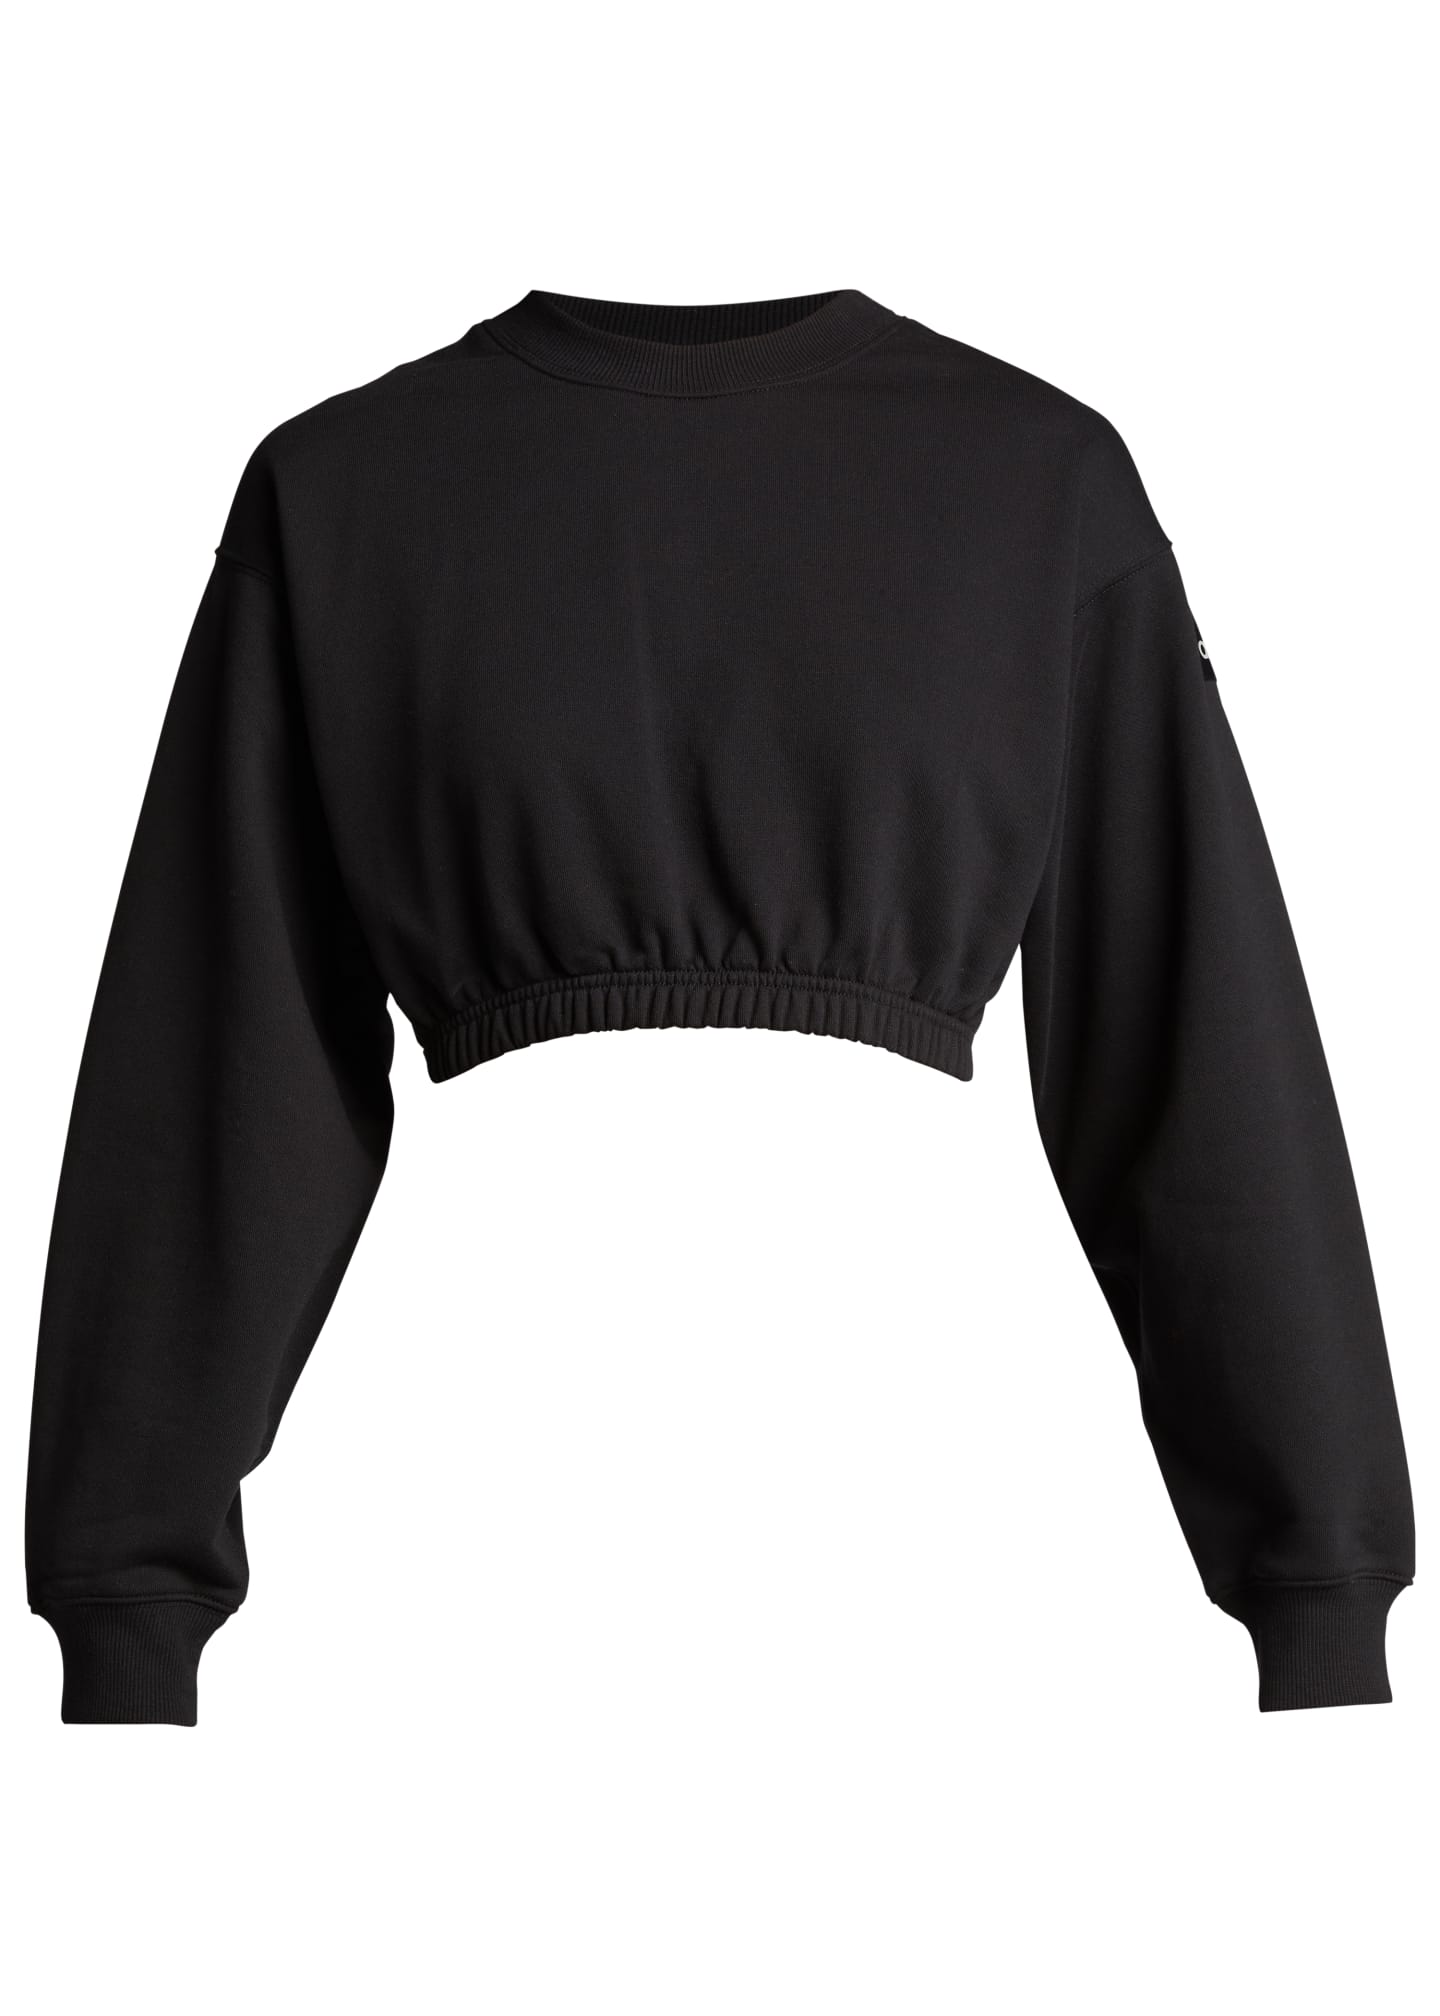 ALO Pullover Activewear Tops for Women for sale